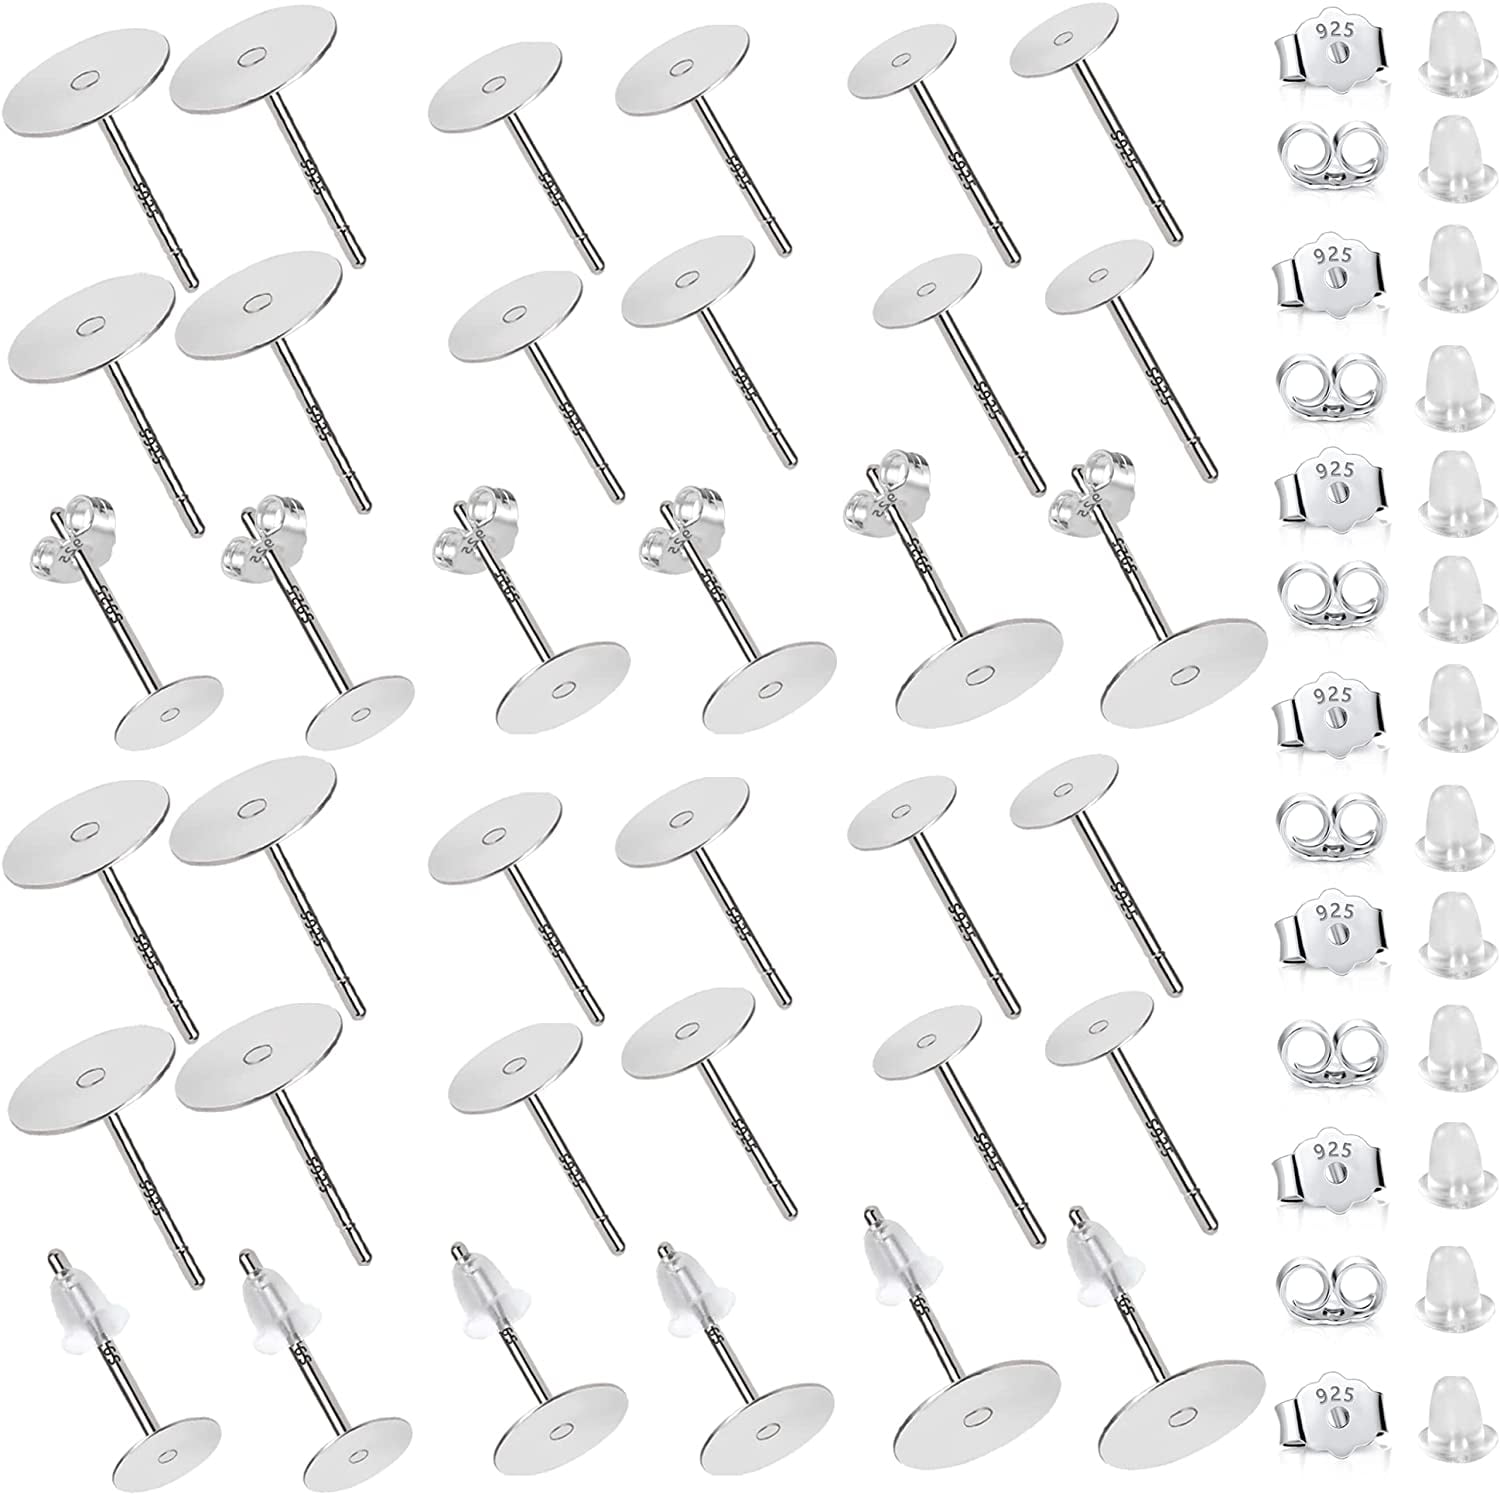 Earring Posts for Jewelry Making, 200 PCS Hypoallergenic Stainless Steel  Earrings Studs with Butterfly and Rubber Bullet Earring Backs for DIY  Jewelry